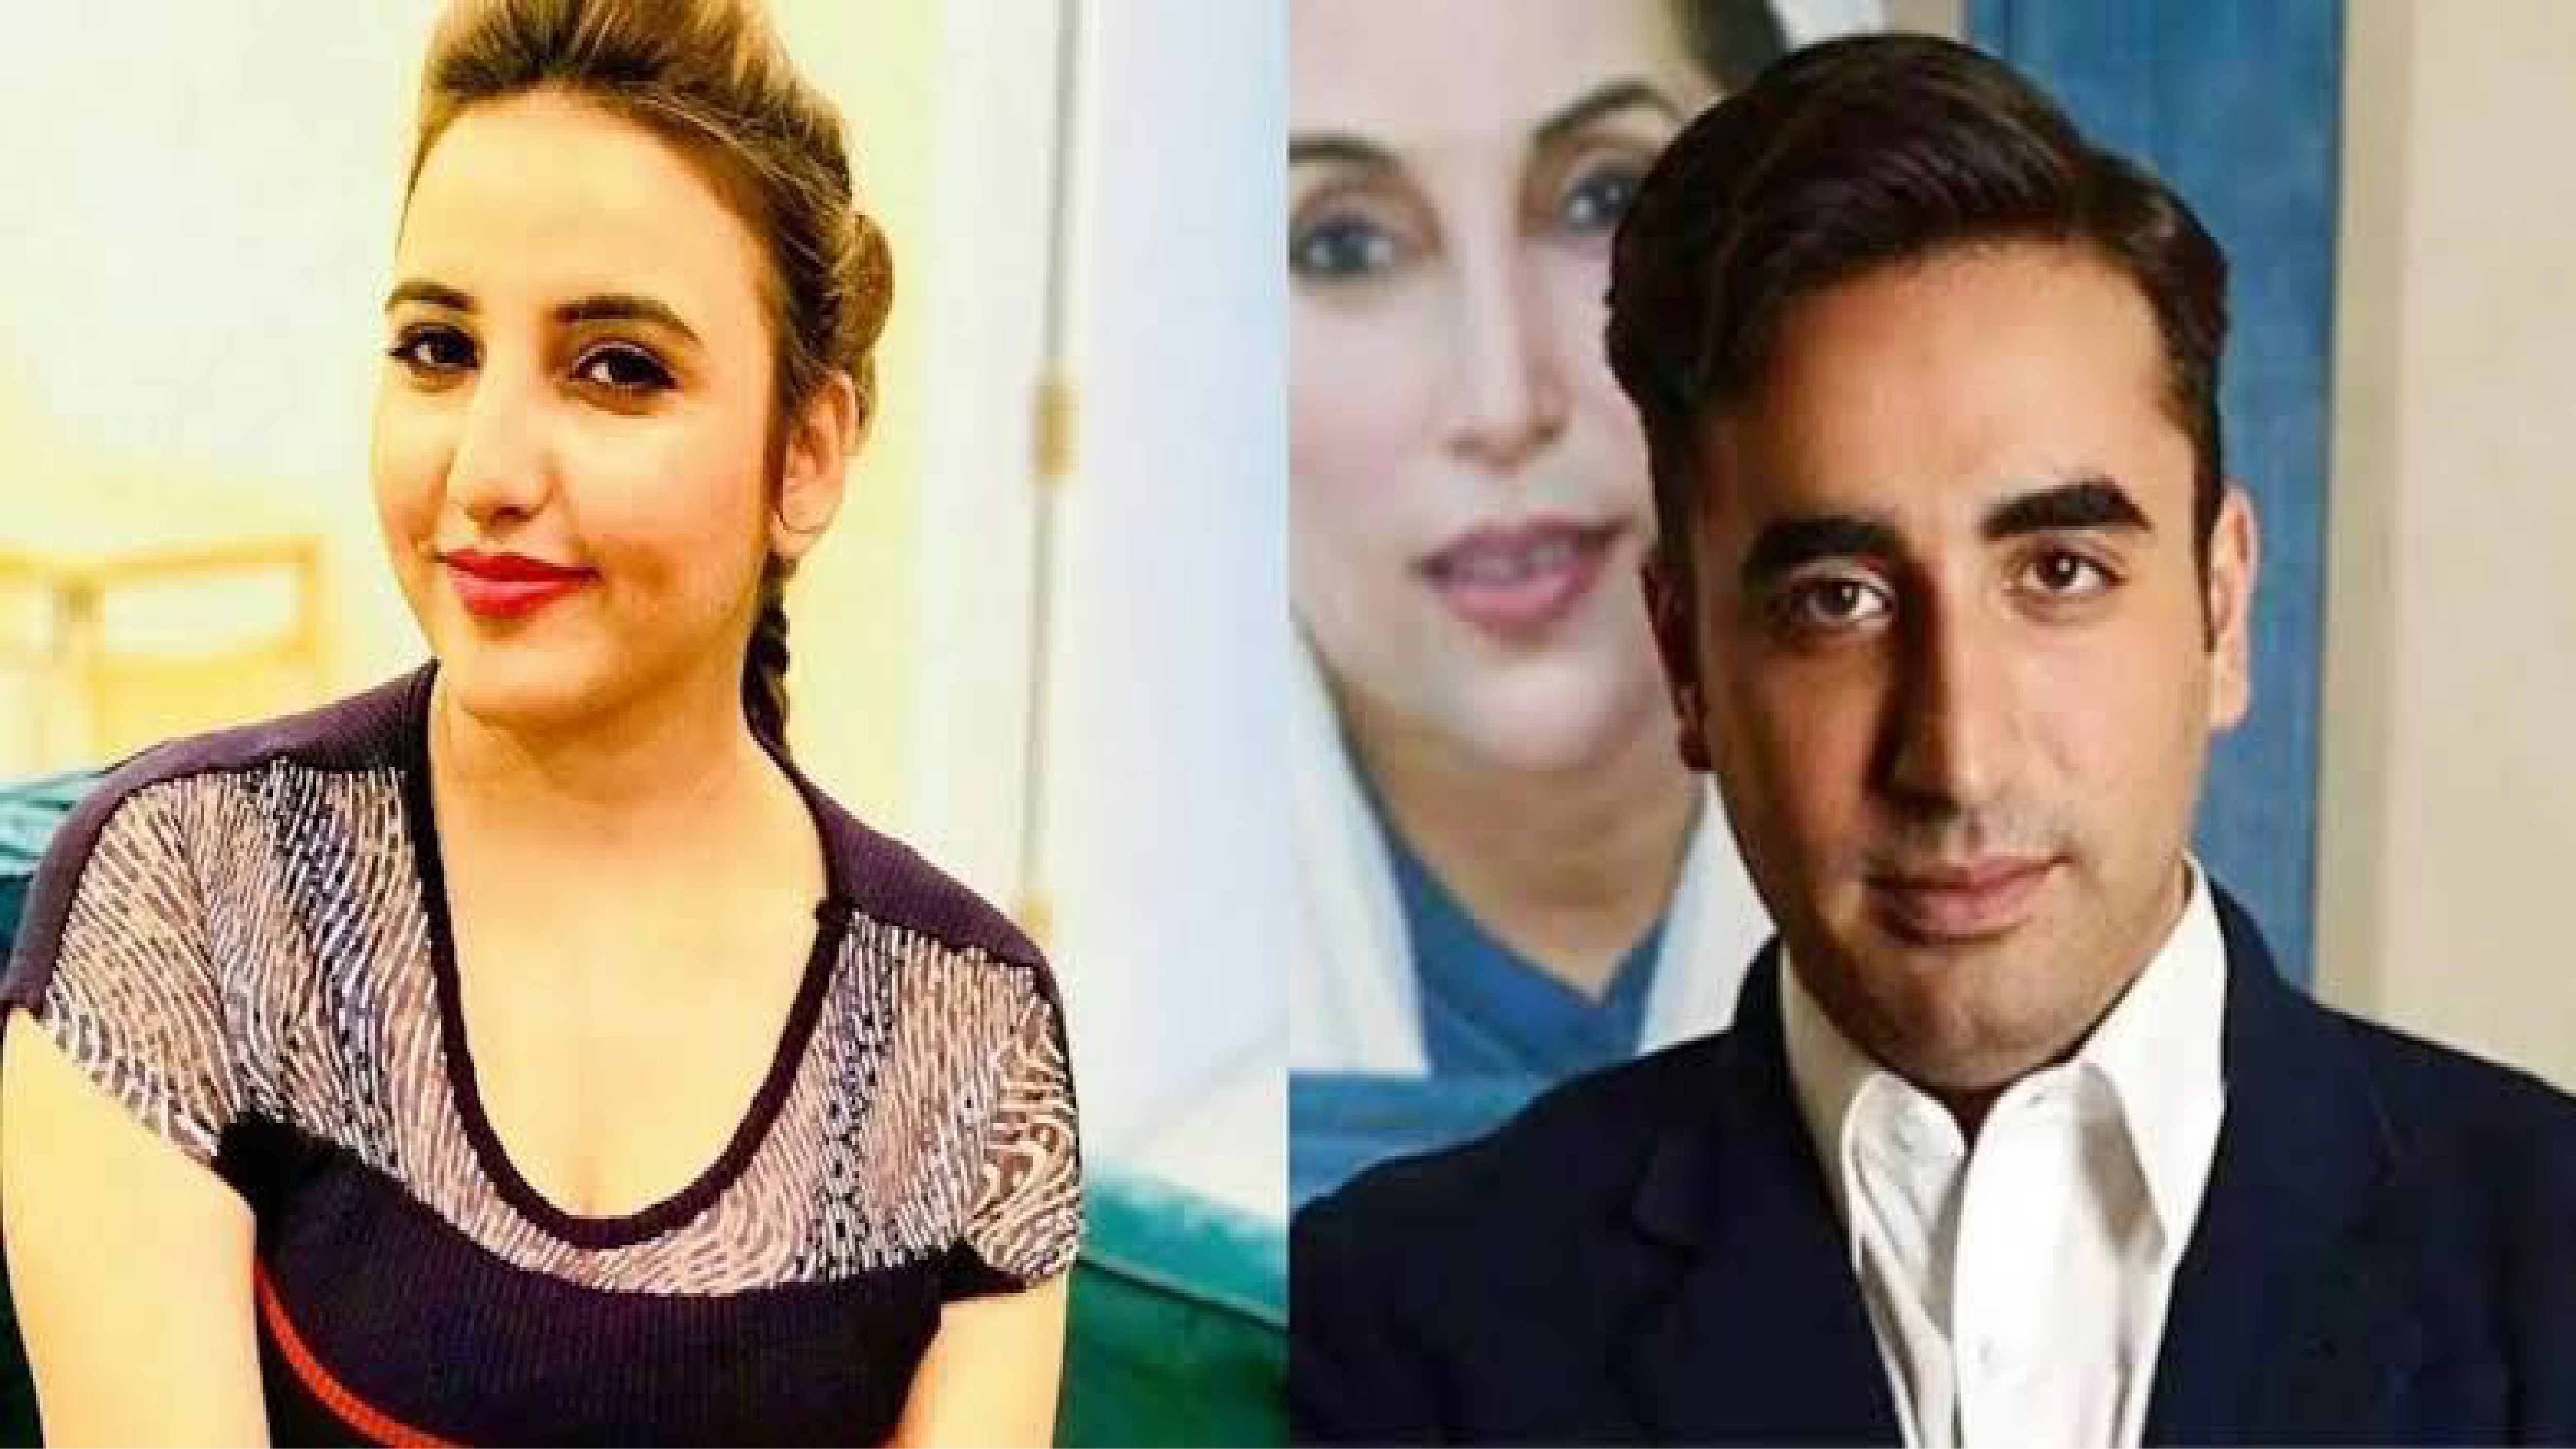 Hareem Shah shows love for Bilawal Bhutto in new video